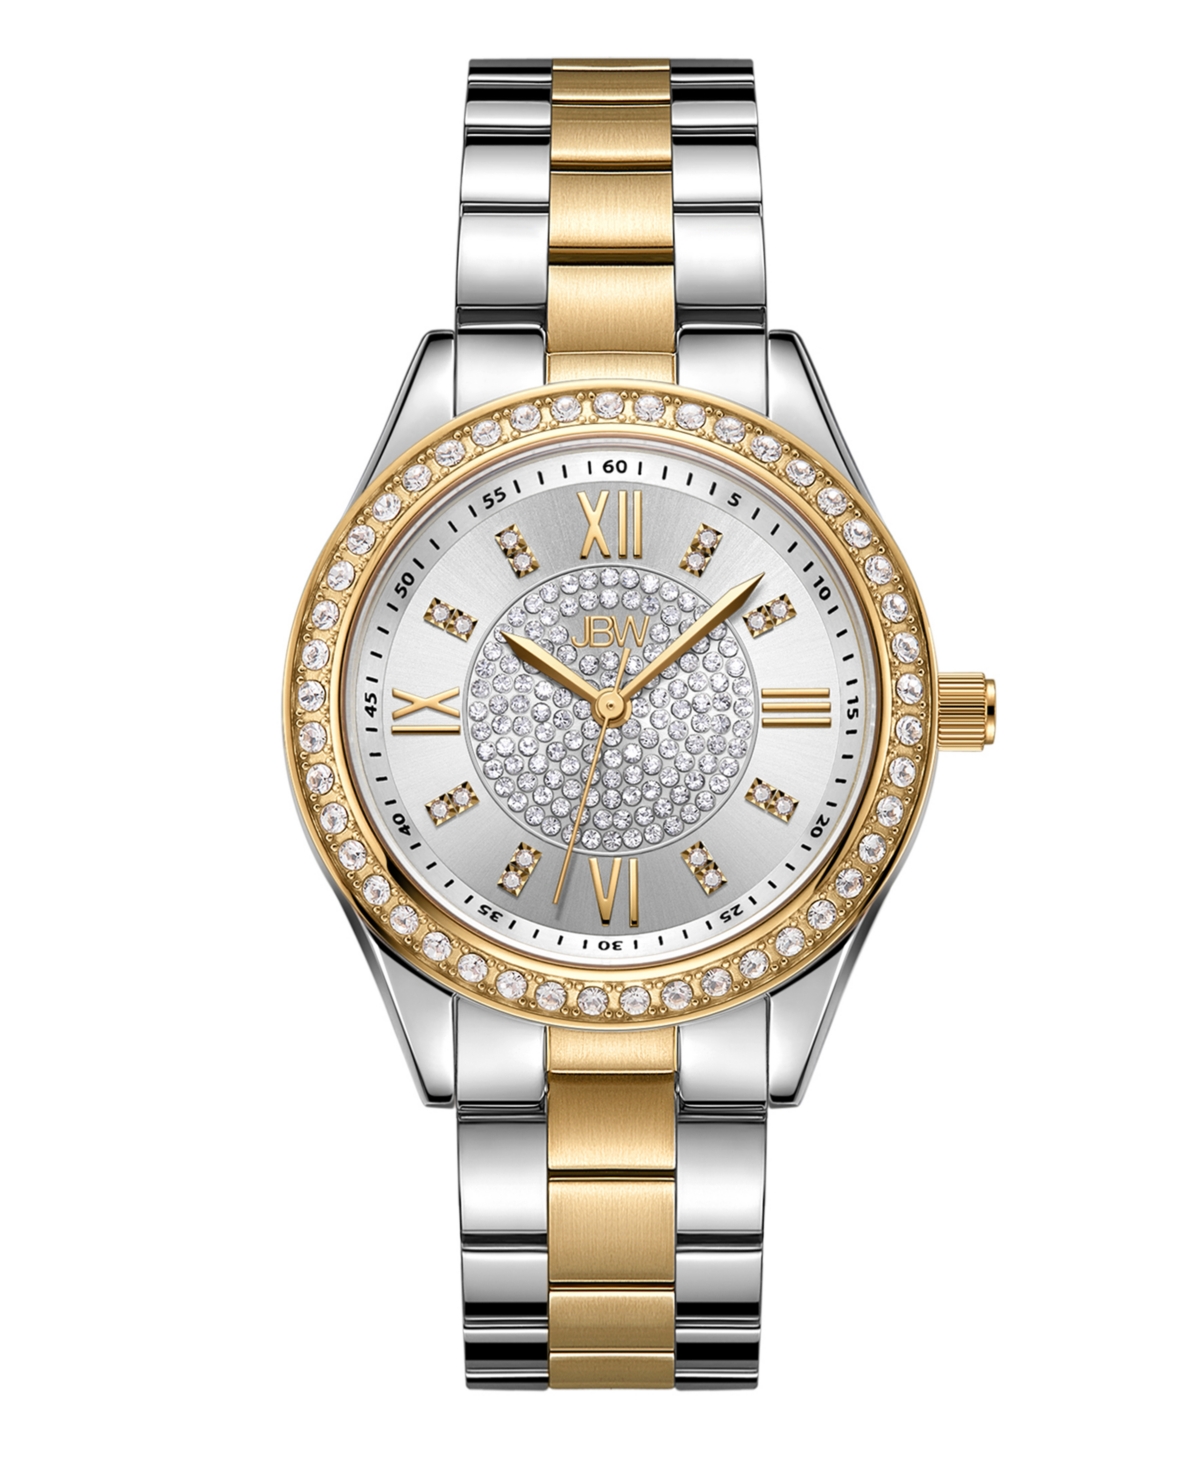 Shop Jbw Women's Mondrian Two-tone 18k Gold-plated Stainless Steel Watch, 34mm